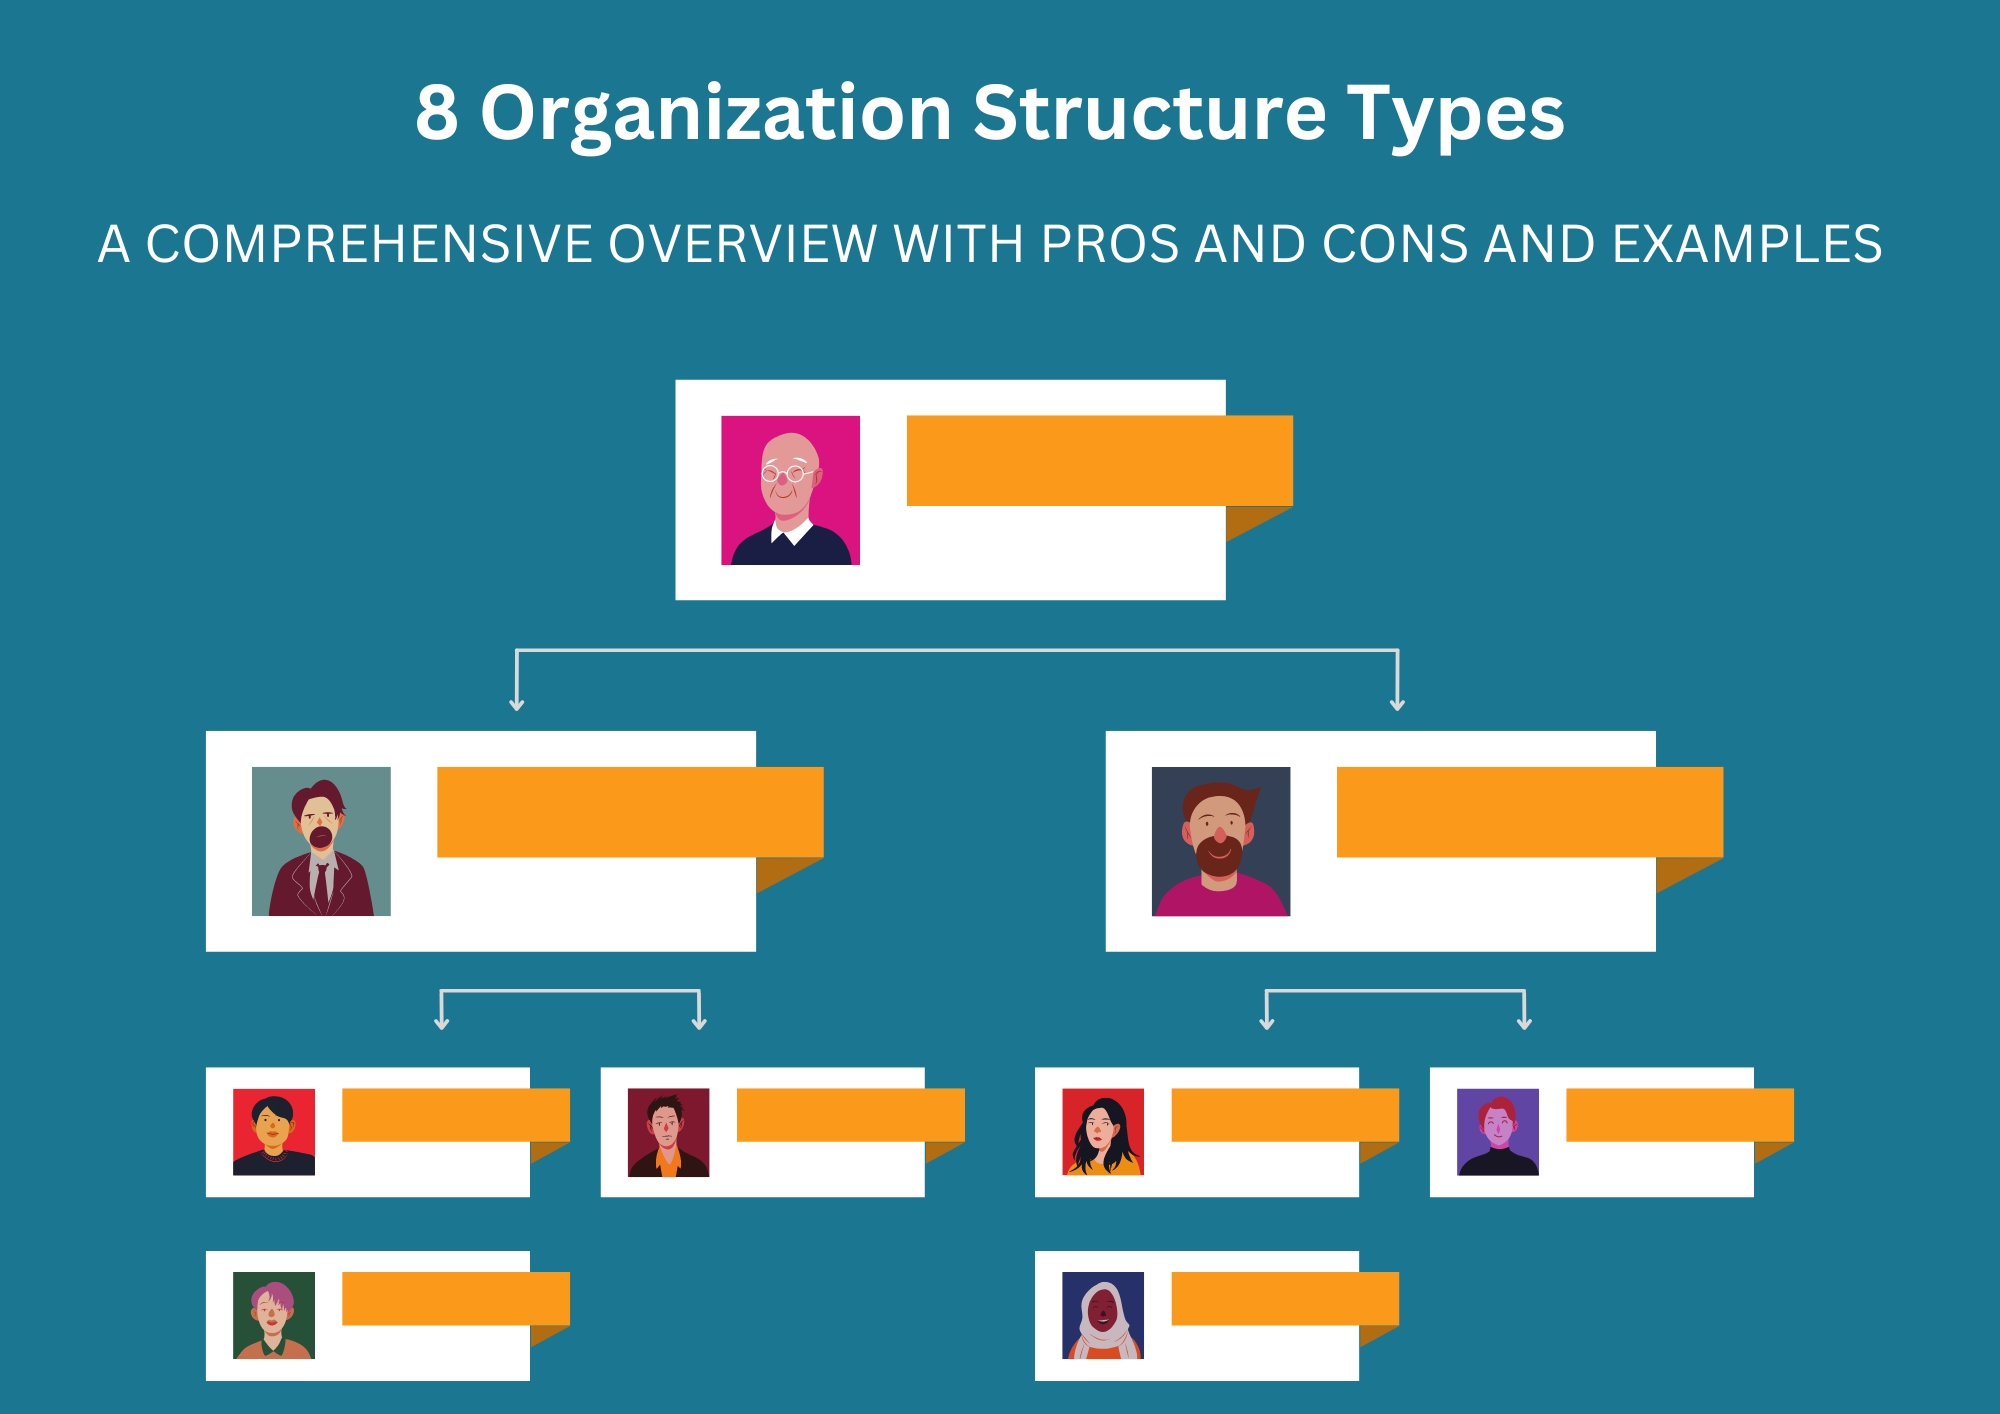 What are the similarities and differences between hybrid and matrix organizational  structures? - Quora